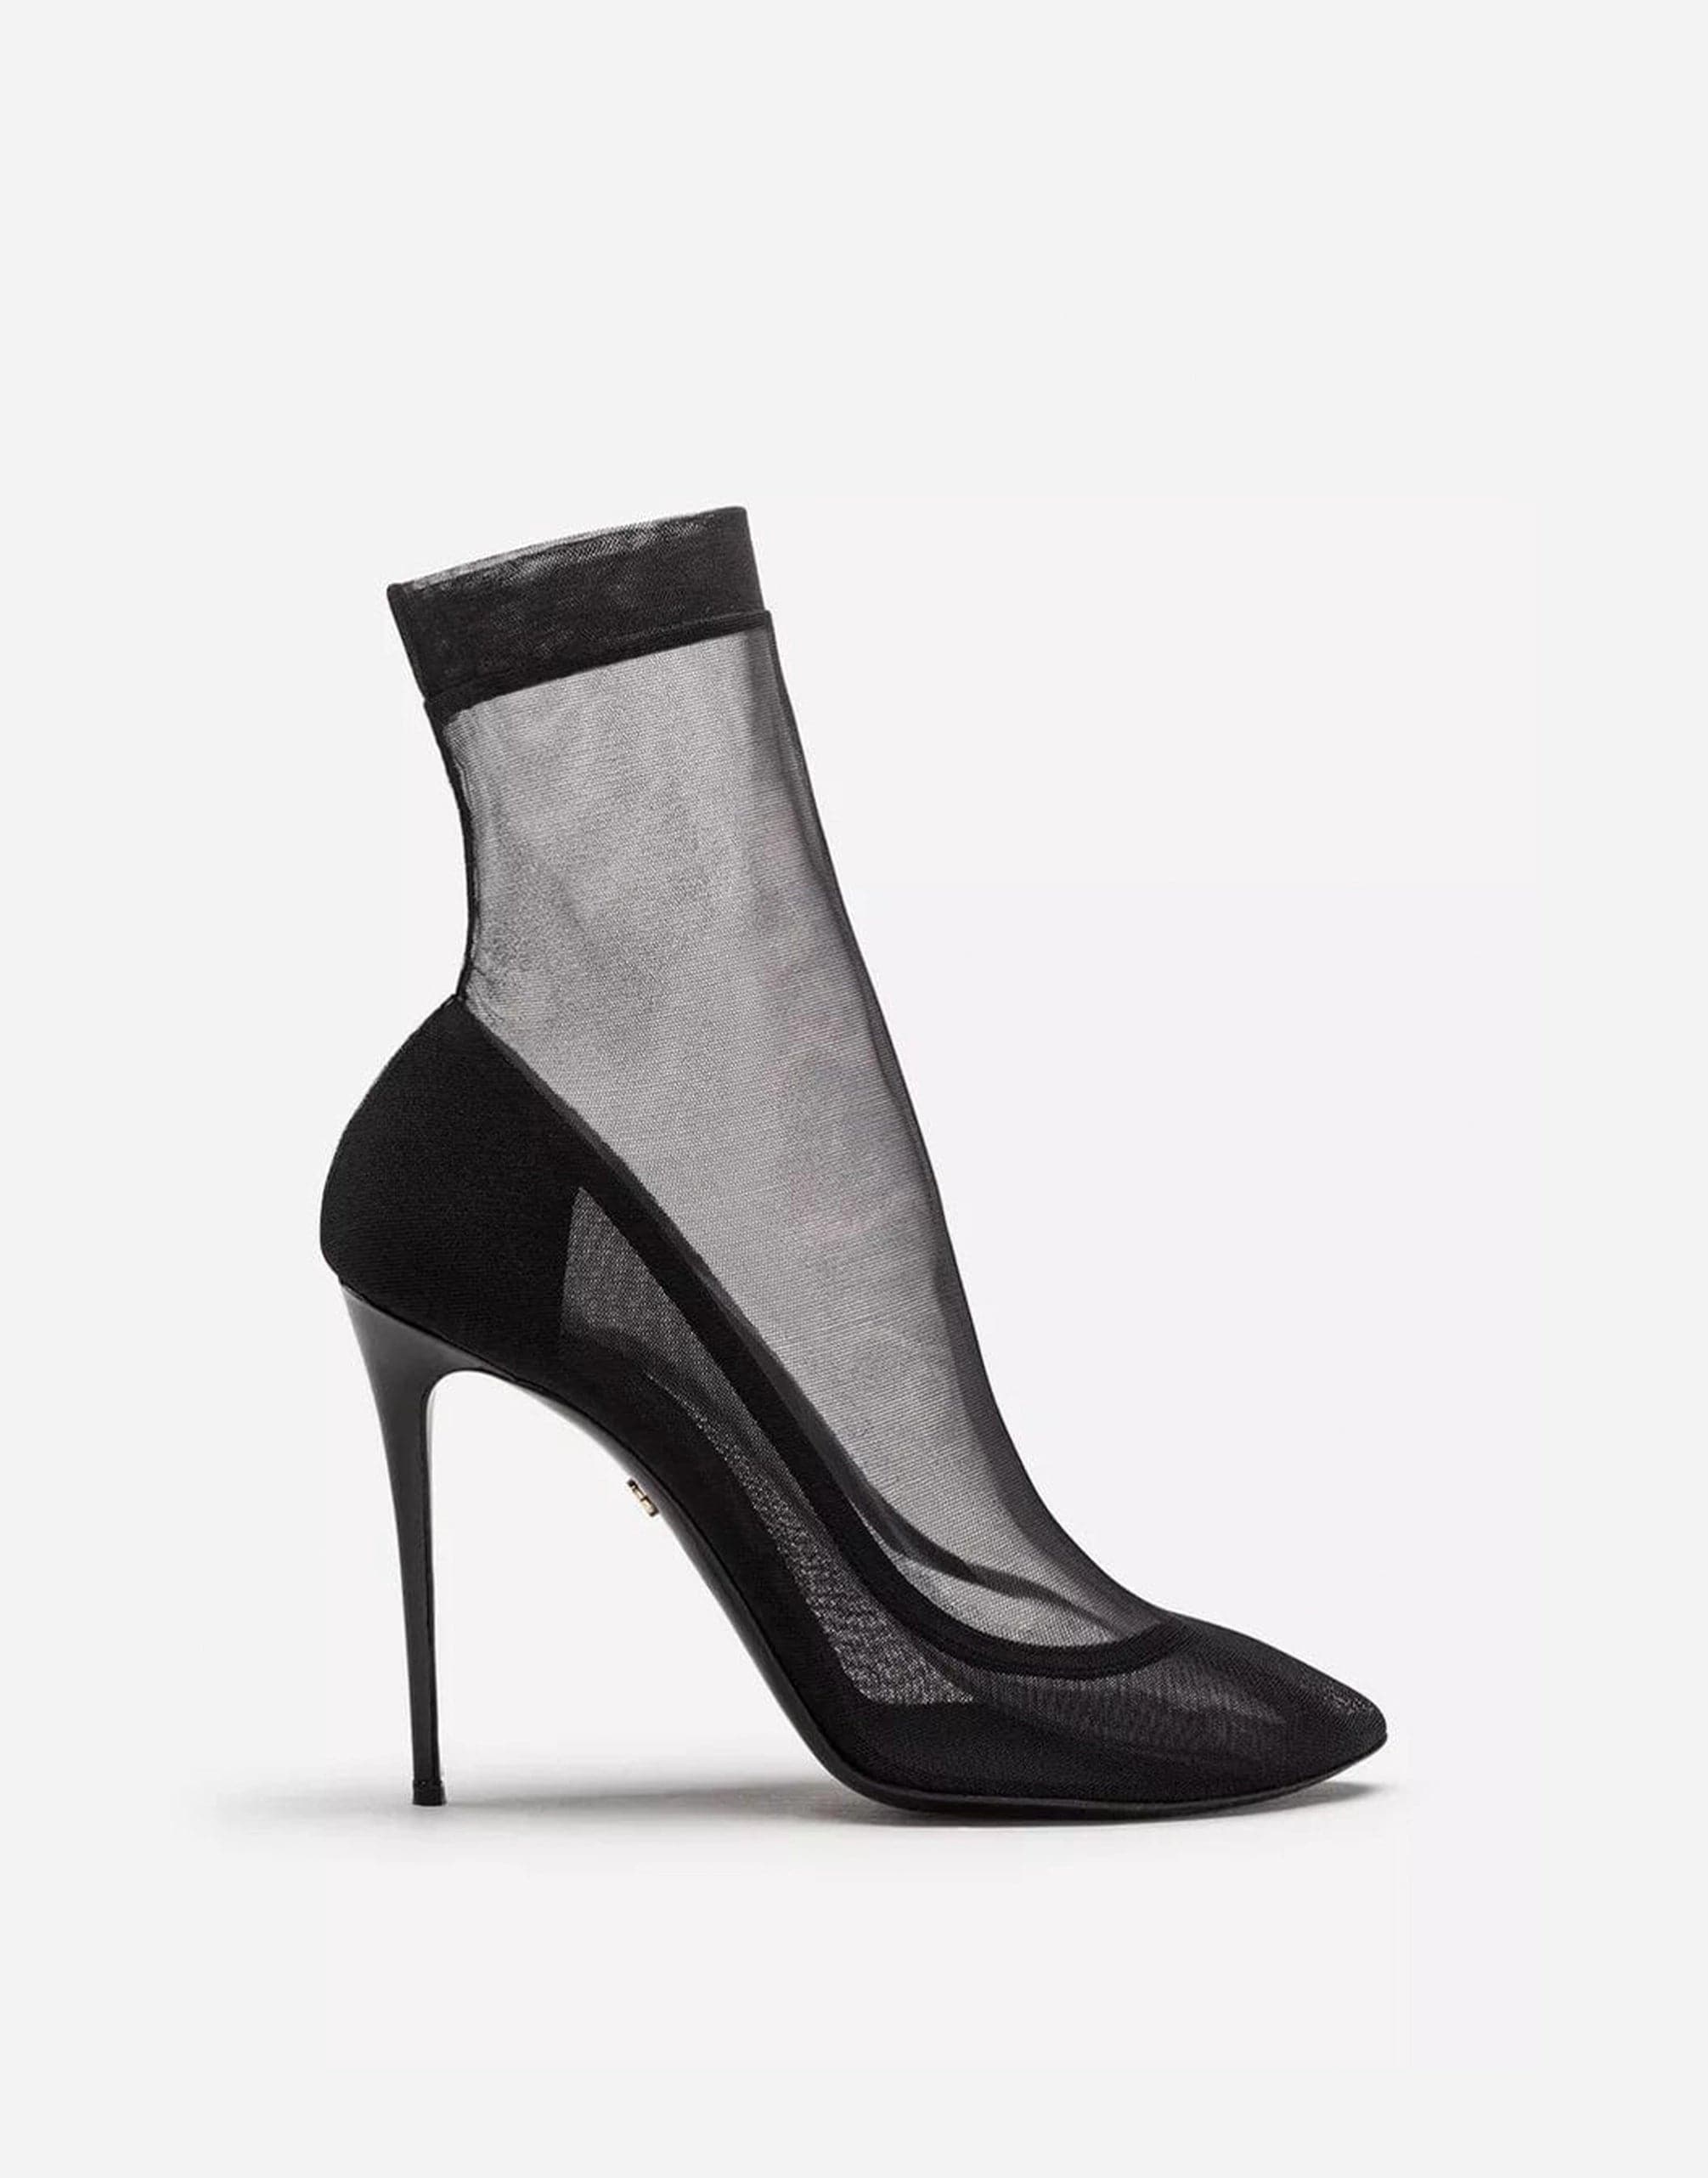 Dolce & Gabbana Stretch Tulle Patent Leather Booties